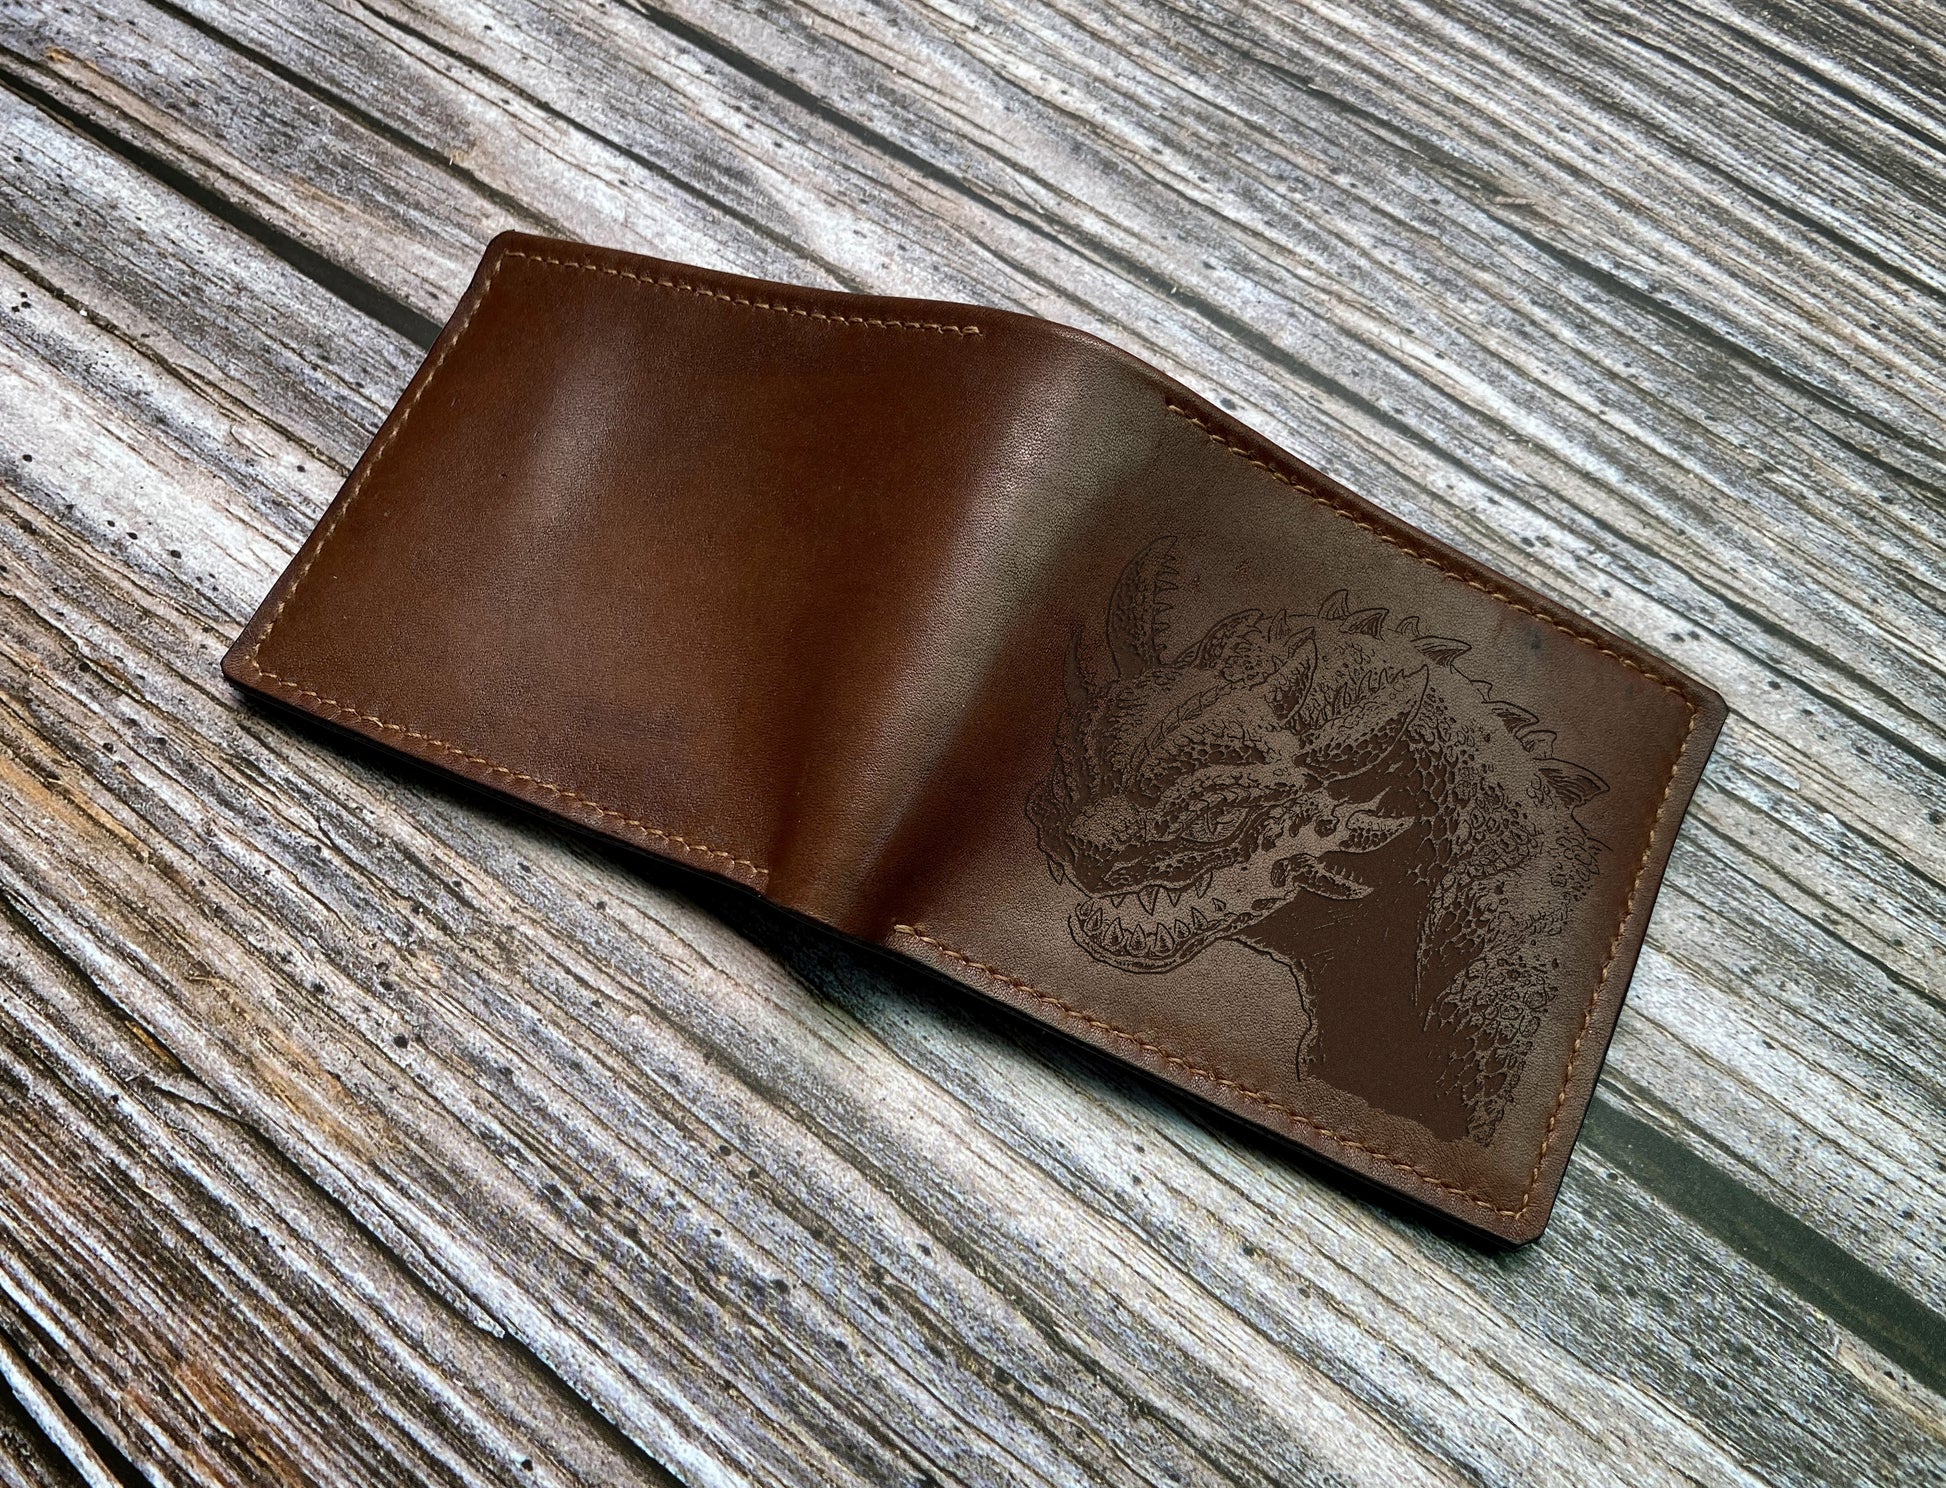 Toothless dragon leather handmade wallet, how to train your dragon gift ideas, dragon men wallet